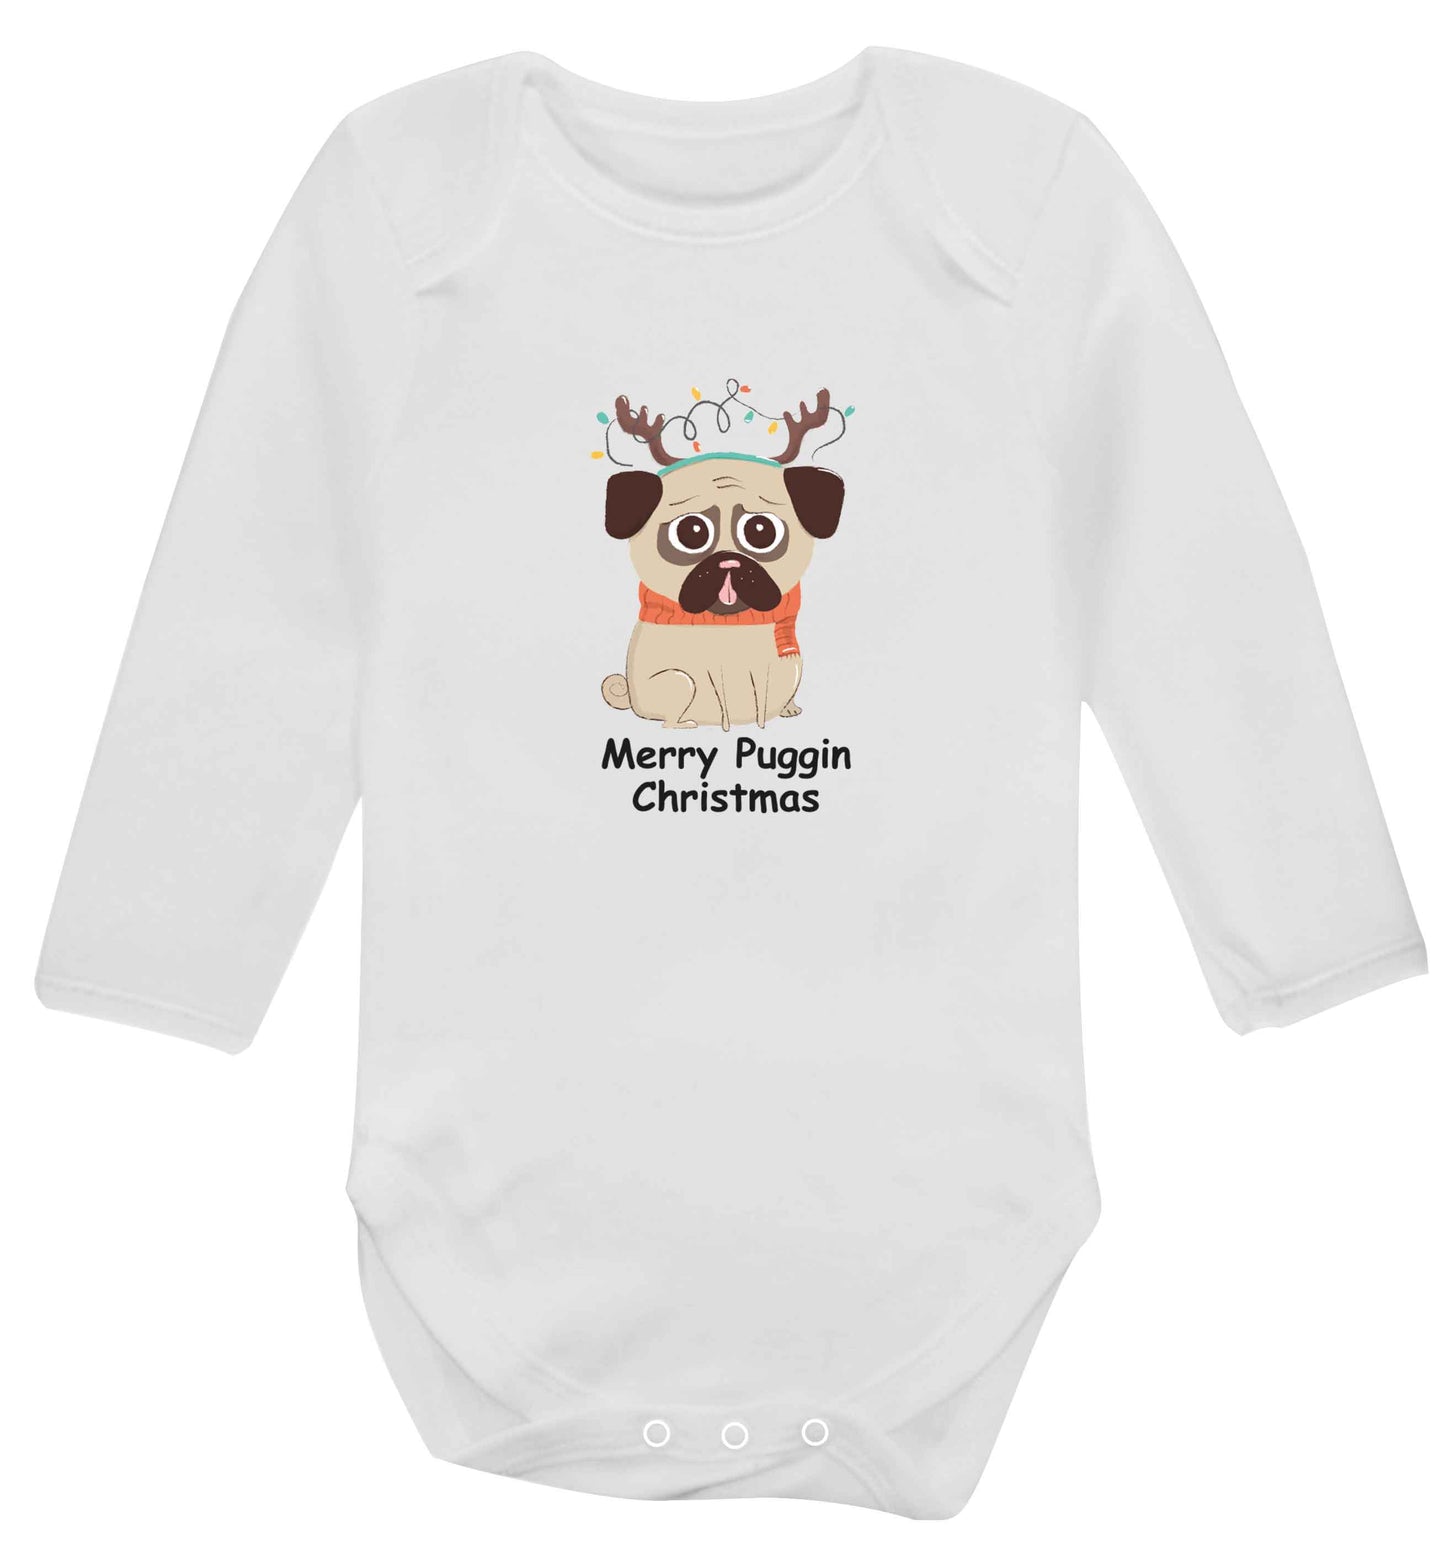 Merry puggin' Chirstmas baby vest long sleeved white 6-12 months